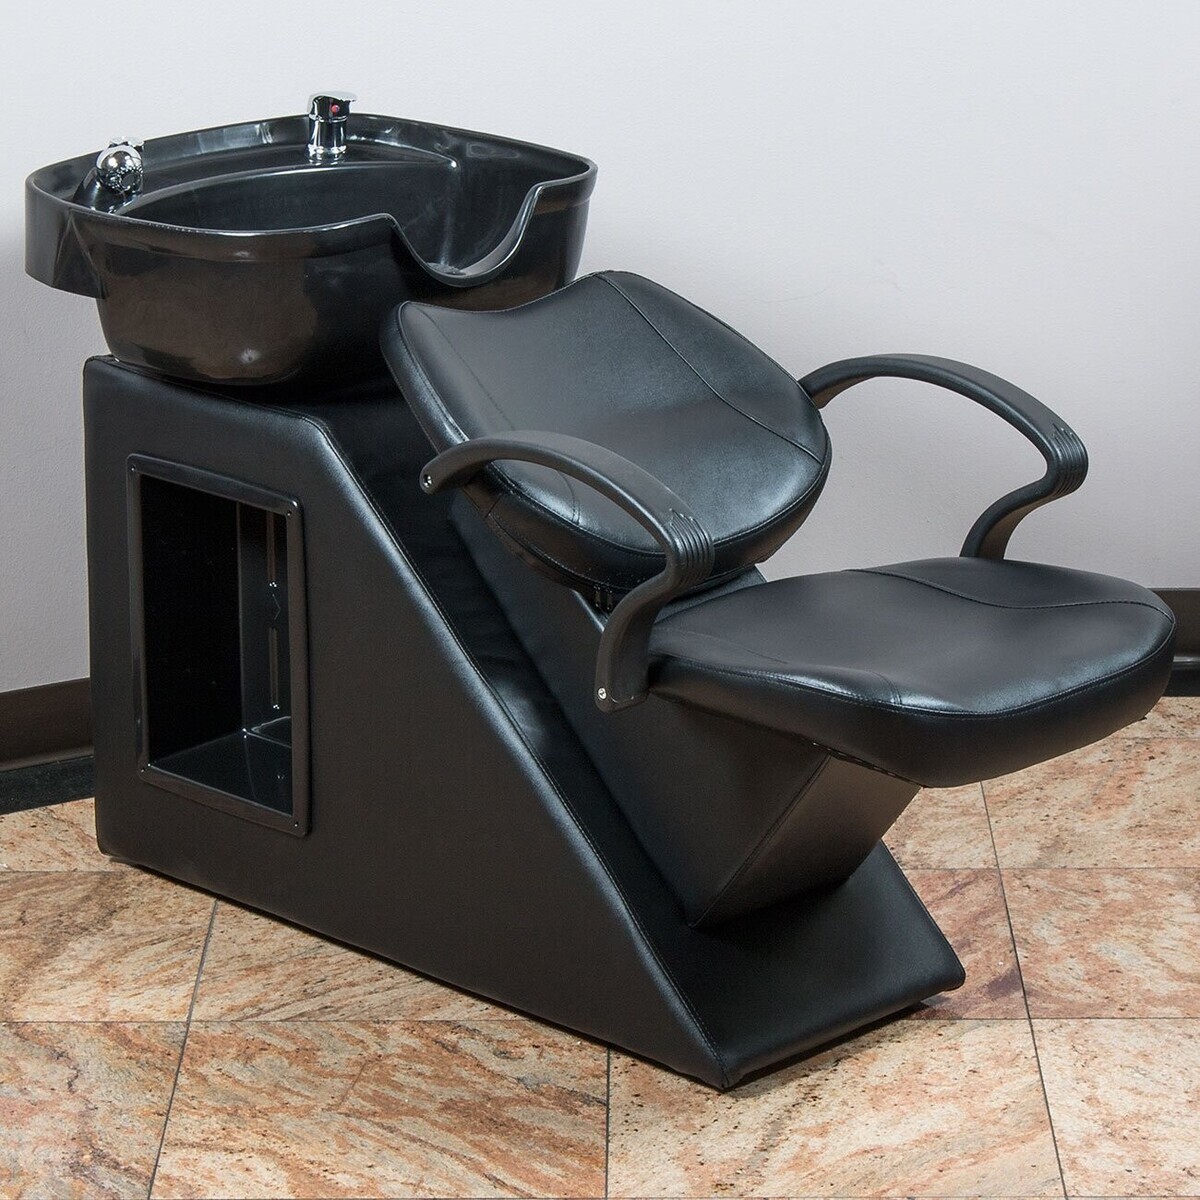 Buying and renting salon stations for washing hair and shampoo bowls in Israel